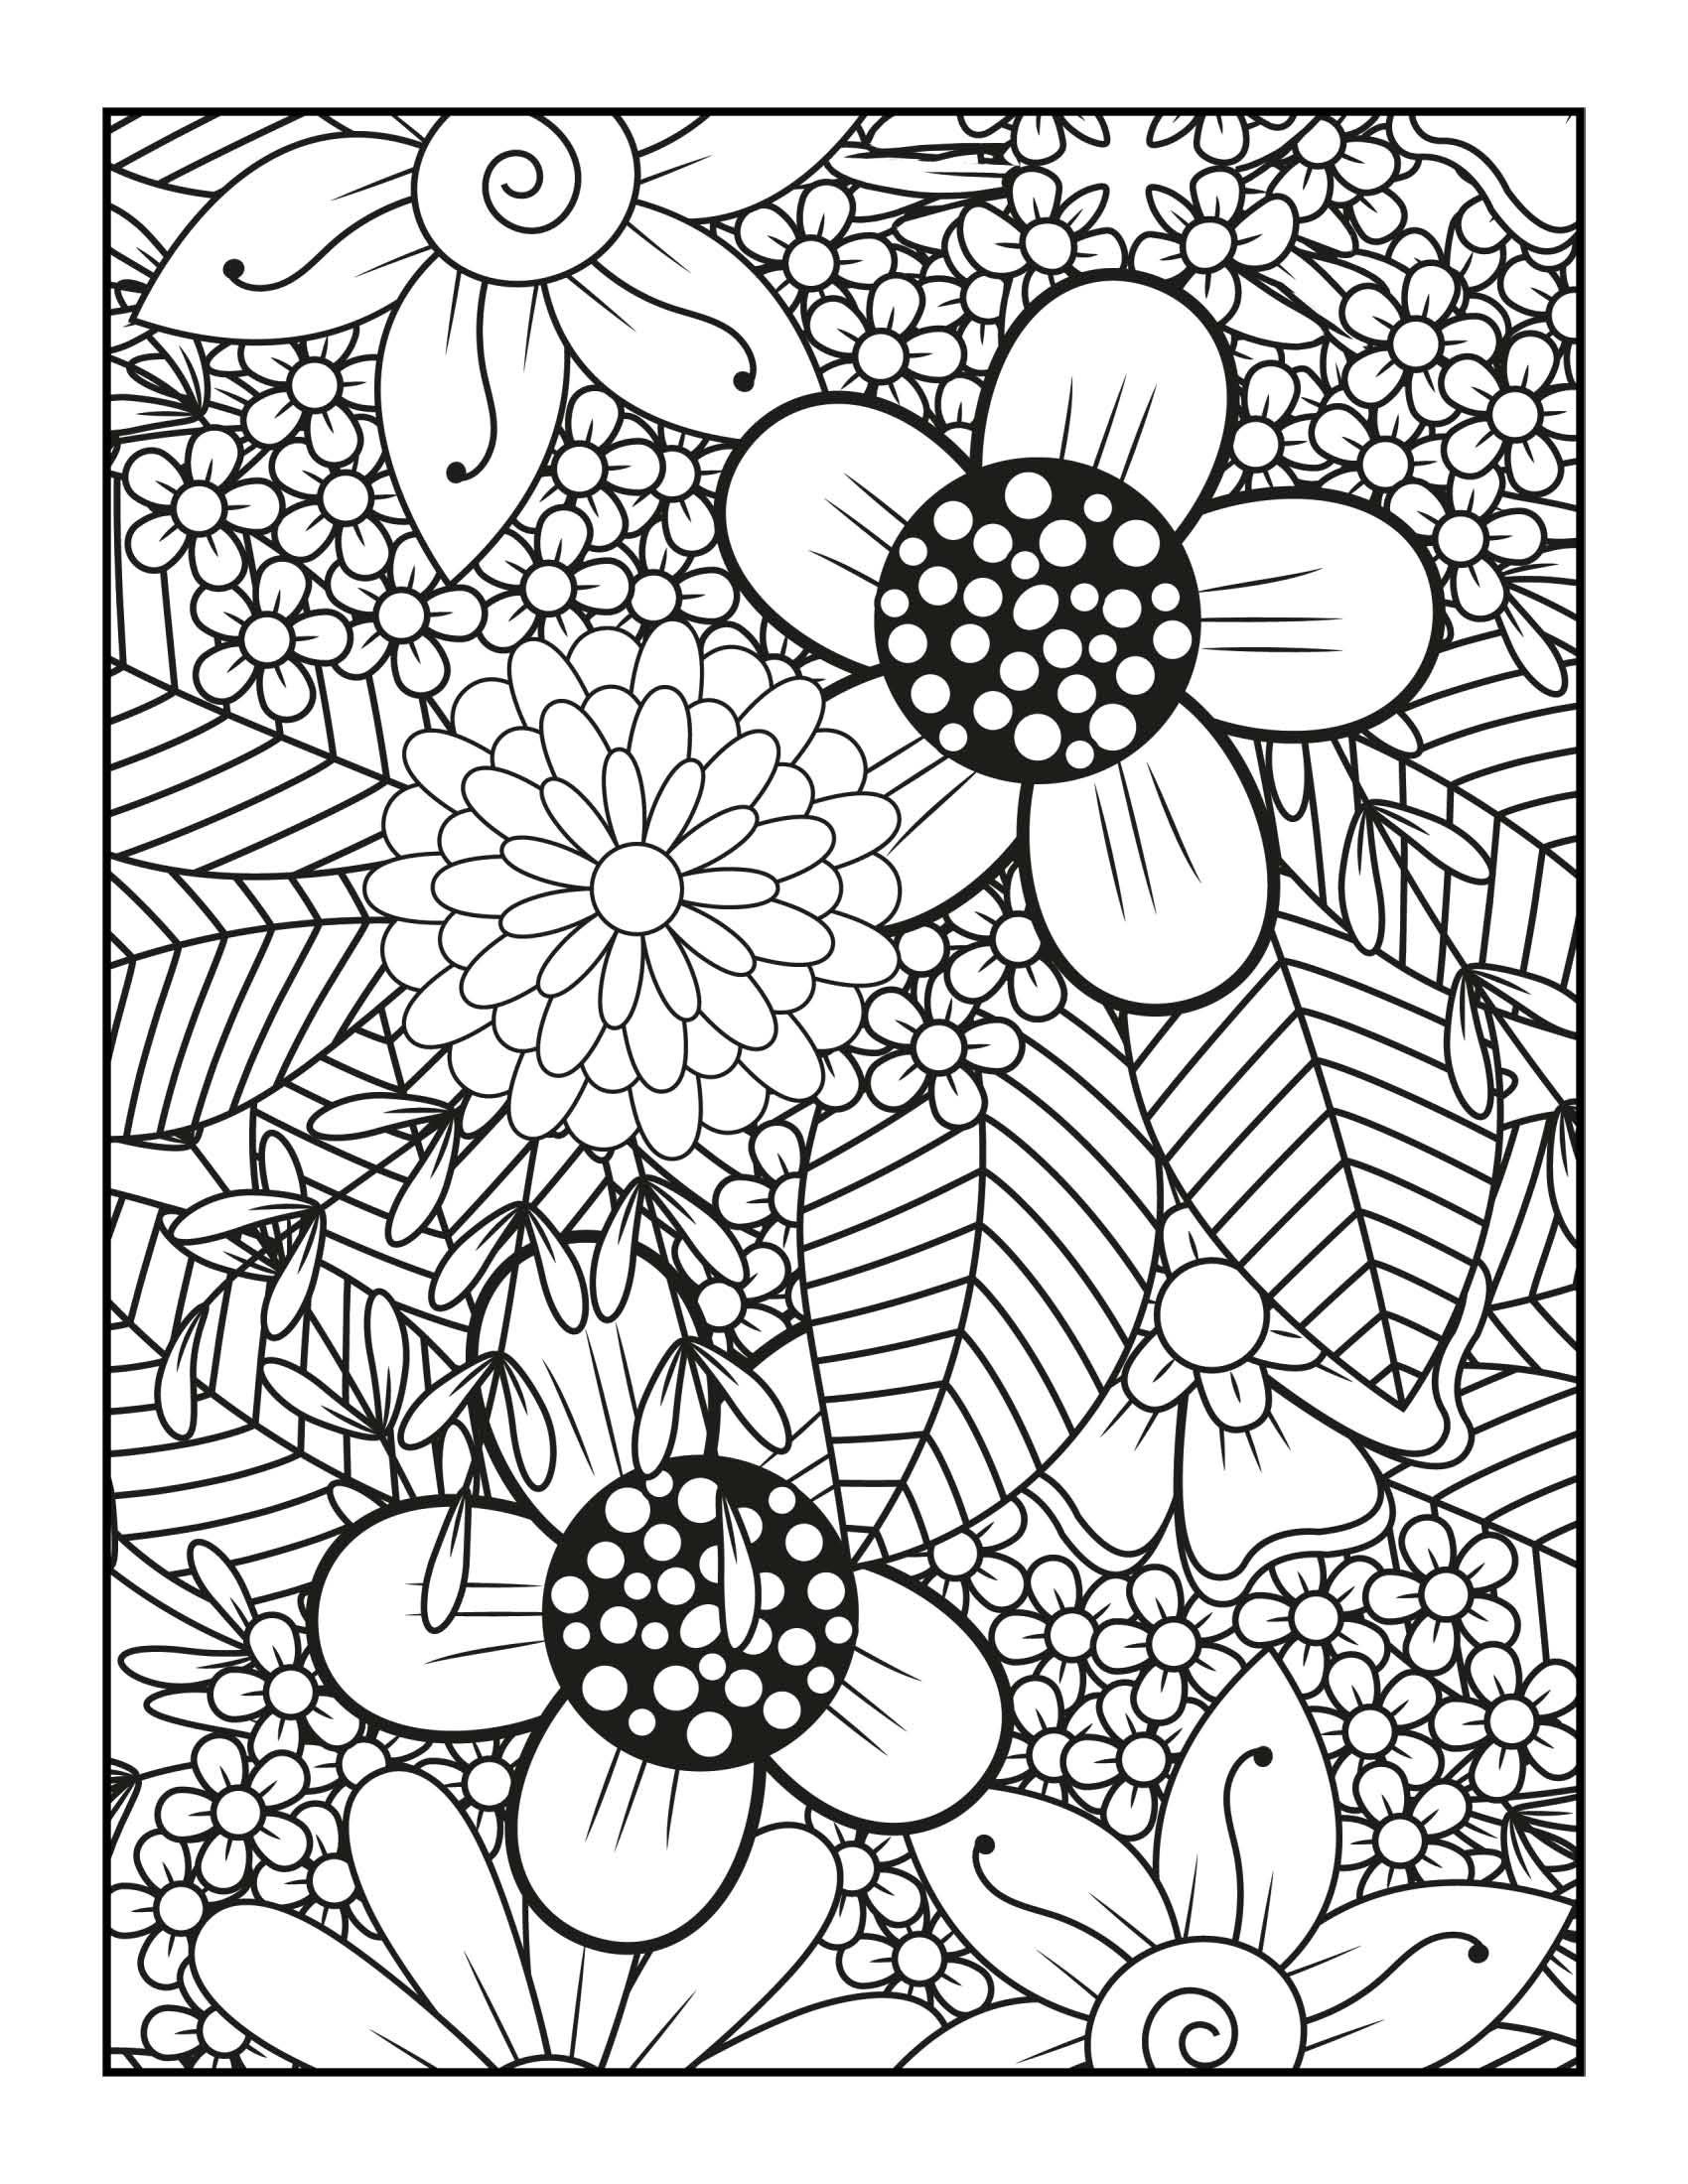  Adult Coloring Books for Women –101 Amazing World